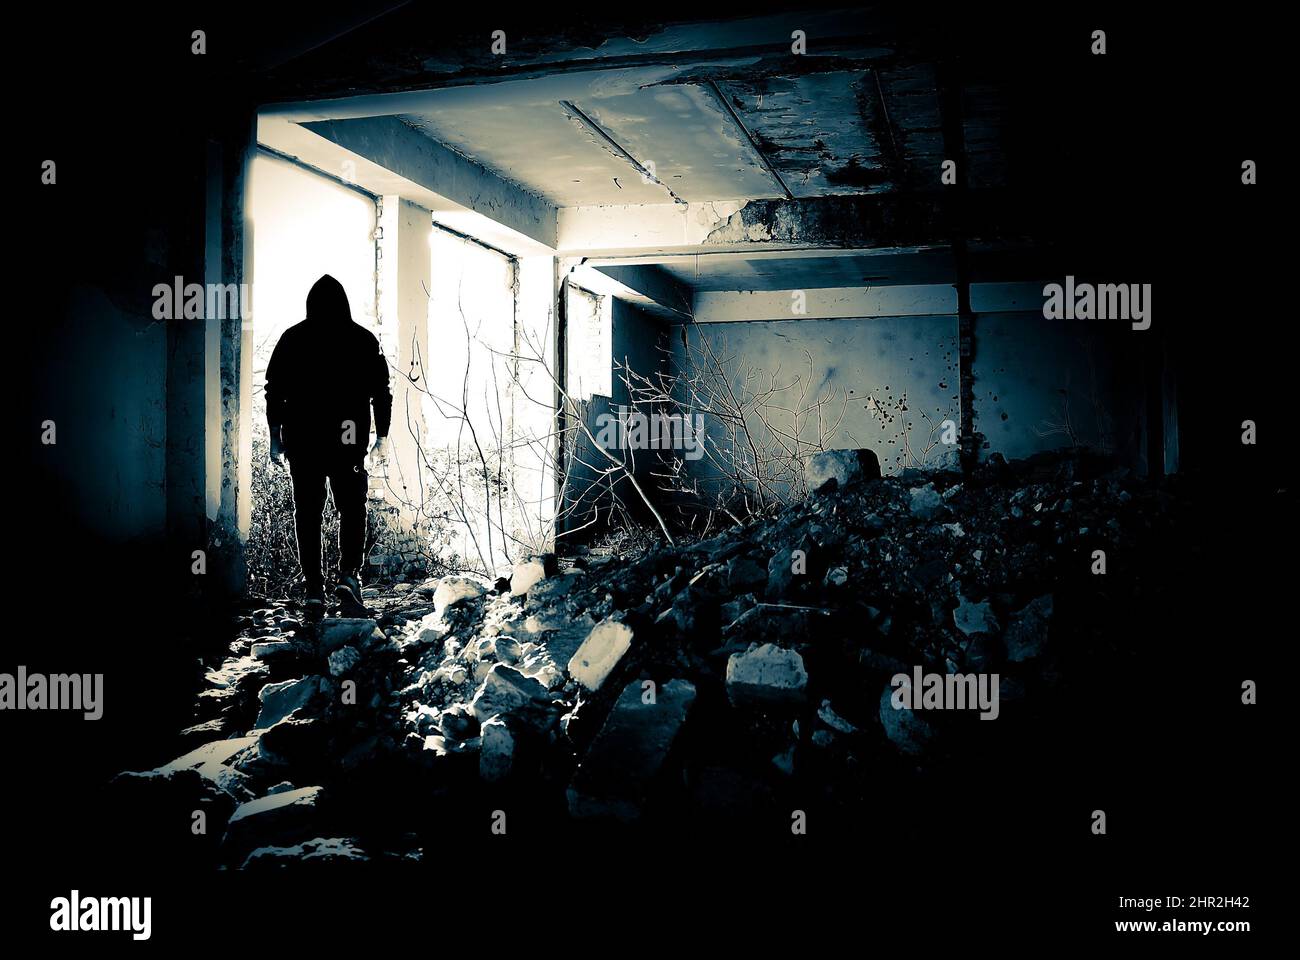 Black human silhouette in a doorway. Human silhouette in an abandoned and ruined place moving to bright light. Stock Photo